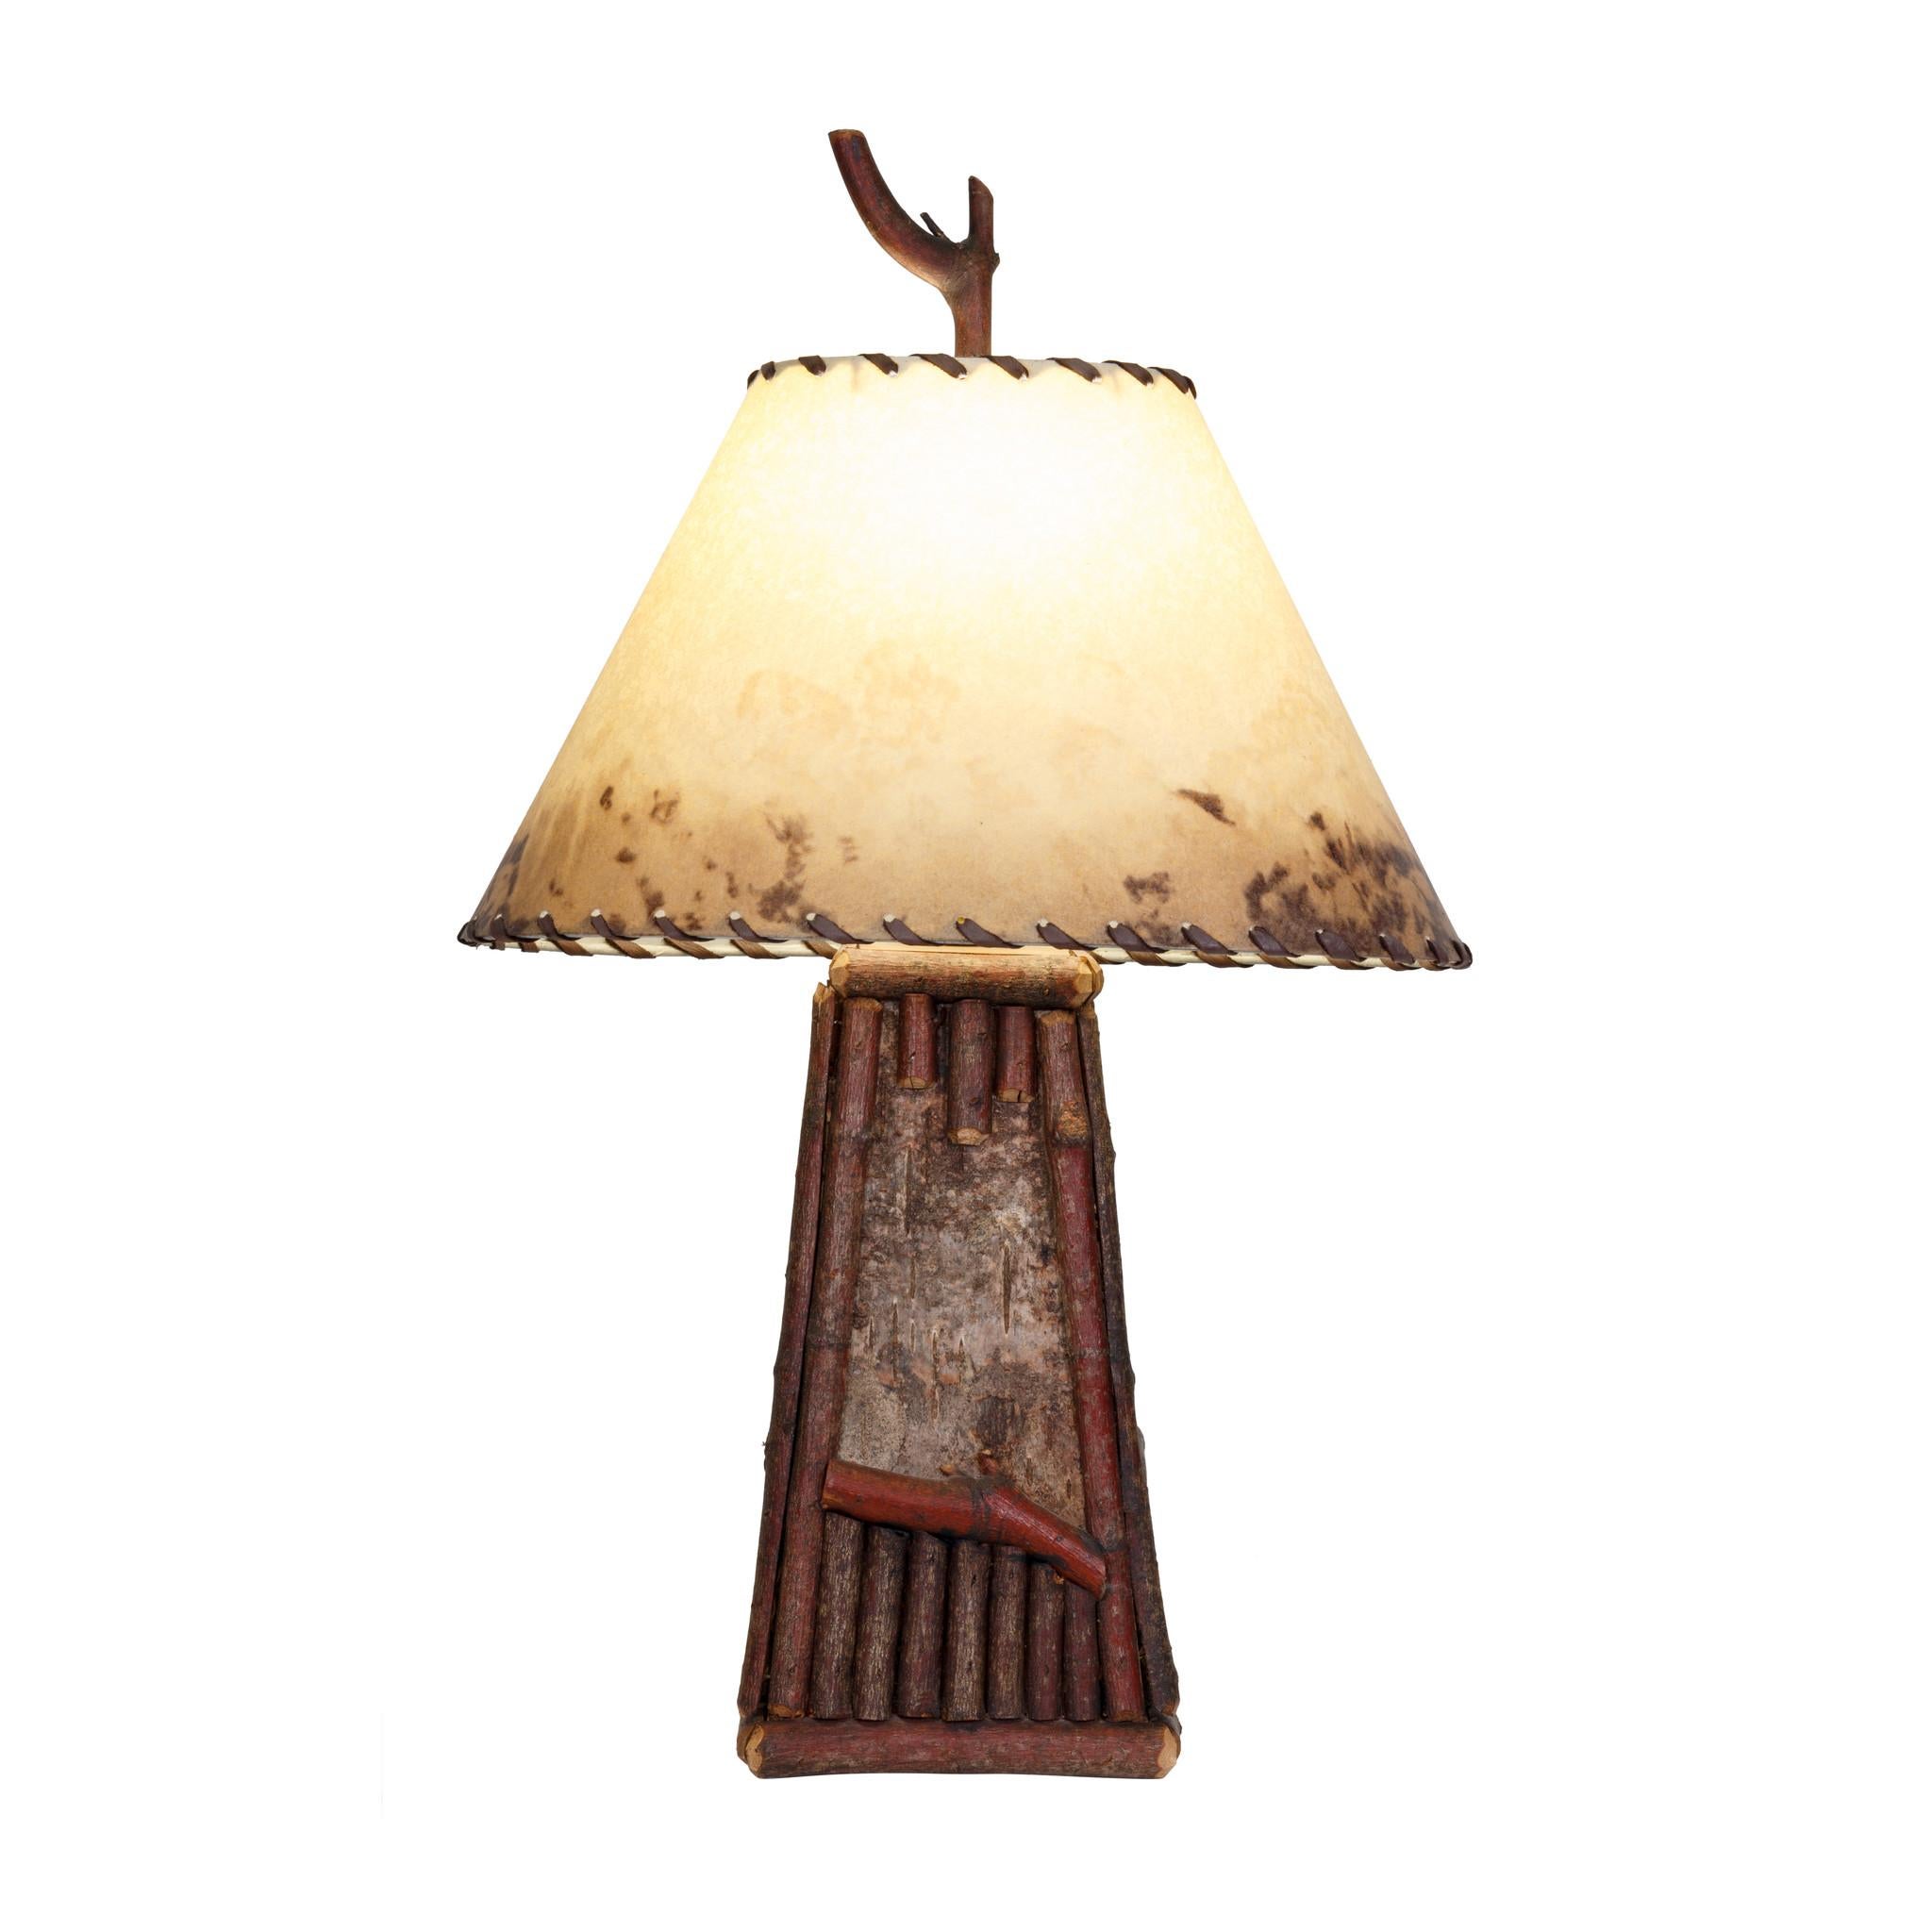 Pair of Adirondack riverfront table or bedside lamps with twigs, branches; with hand painted oil shades. Measures: 20